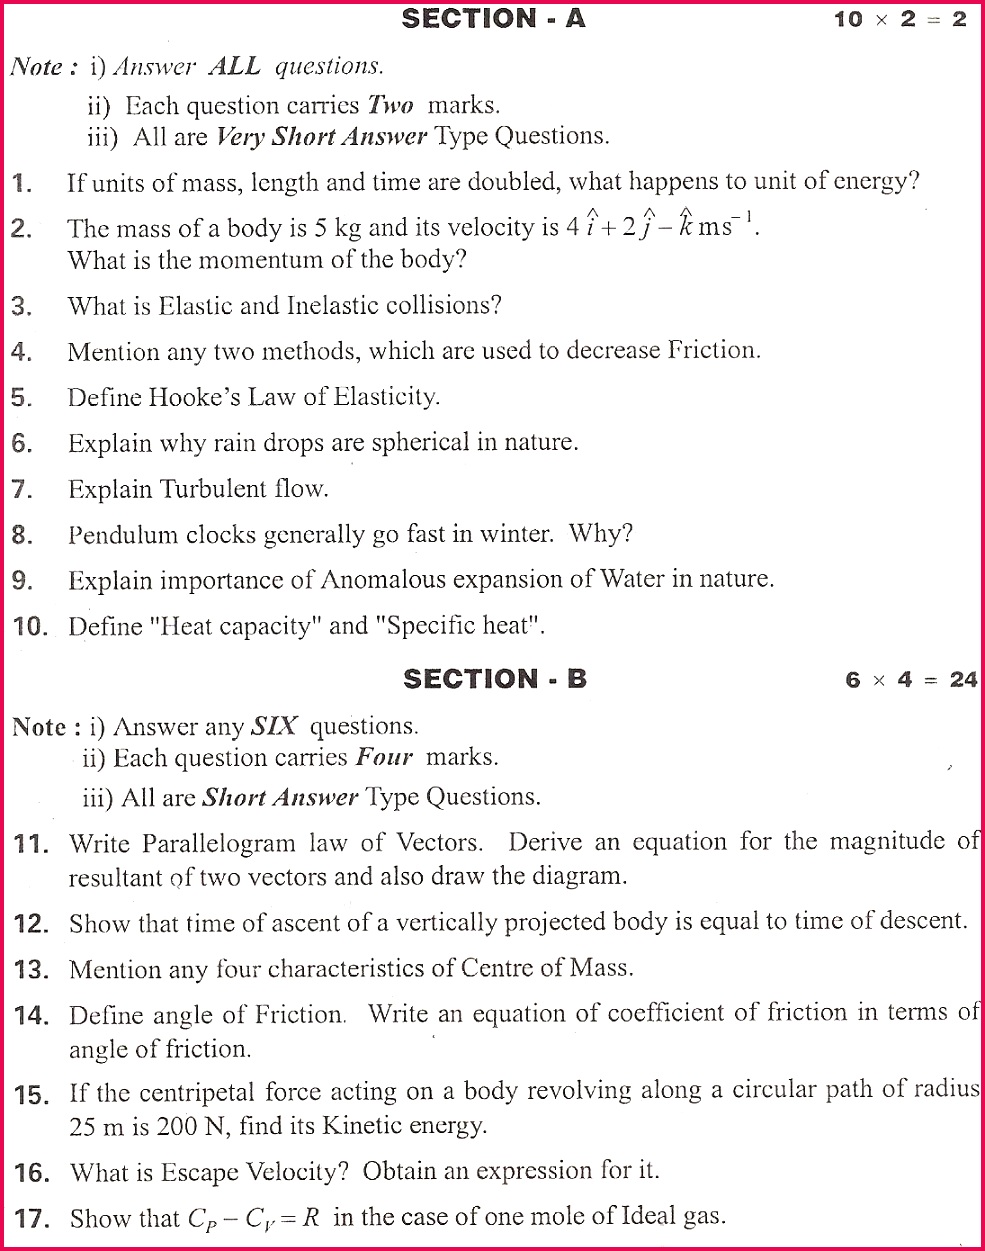 BISE Bahawalpur Board Physics Inter Part Current Past Paper May